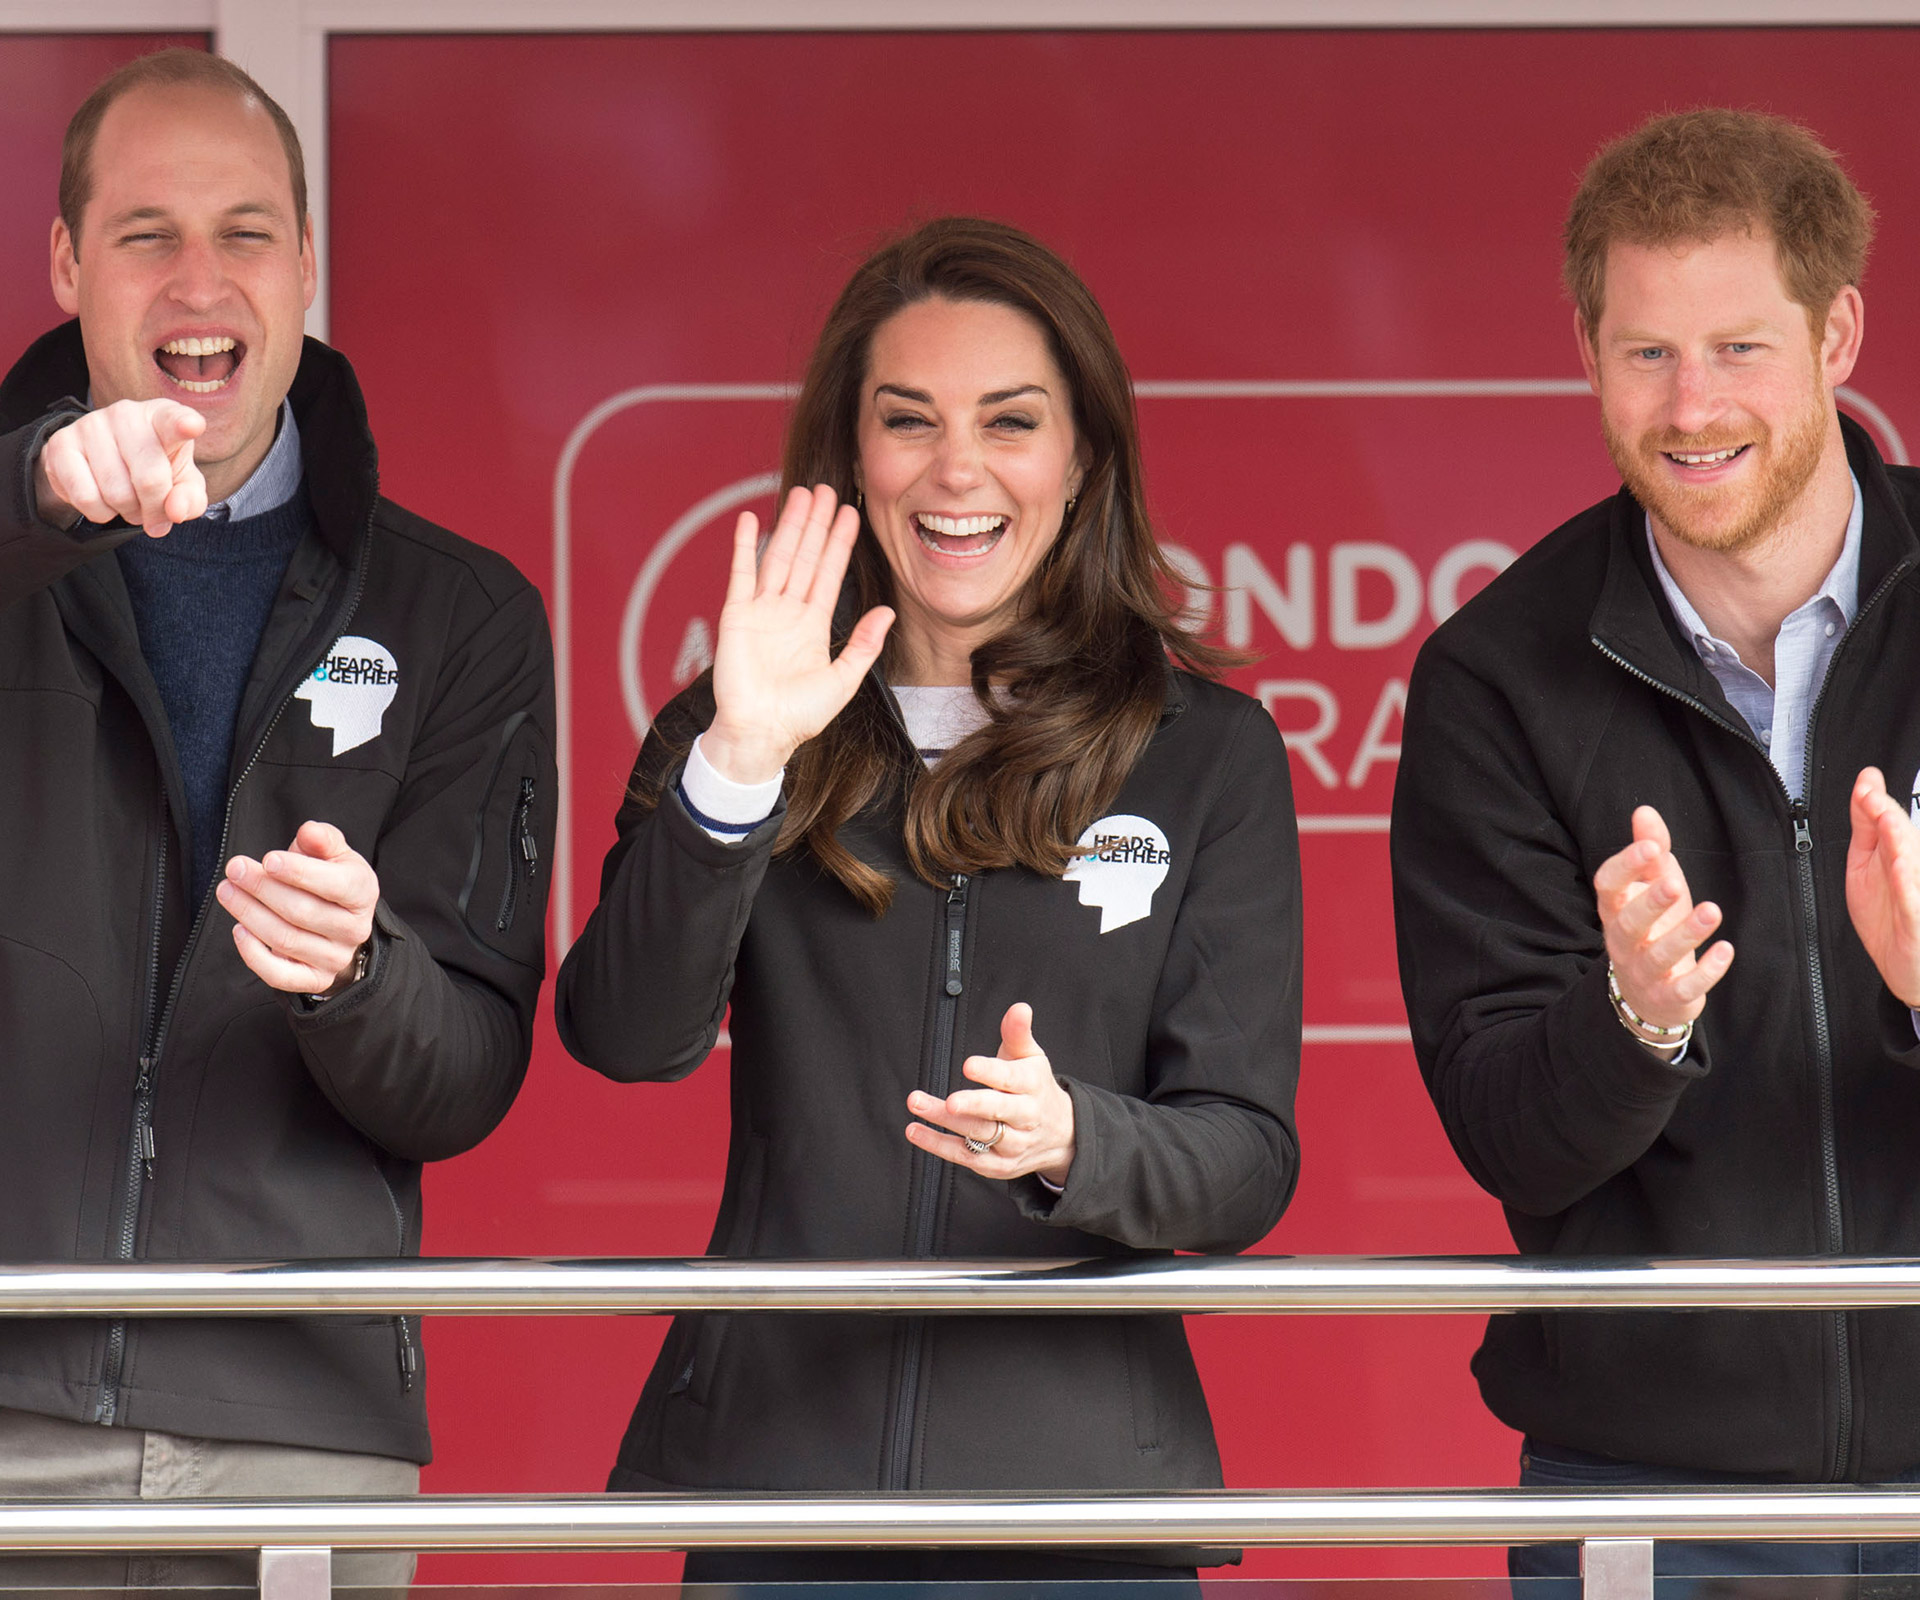 Royal support: Prince William, Duchess Catherine and Prince Harry attend the London Marathon